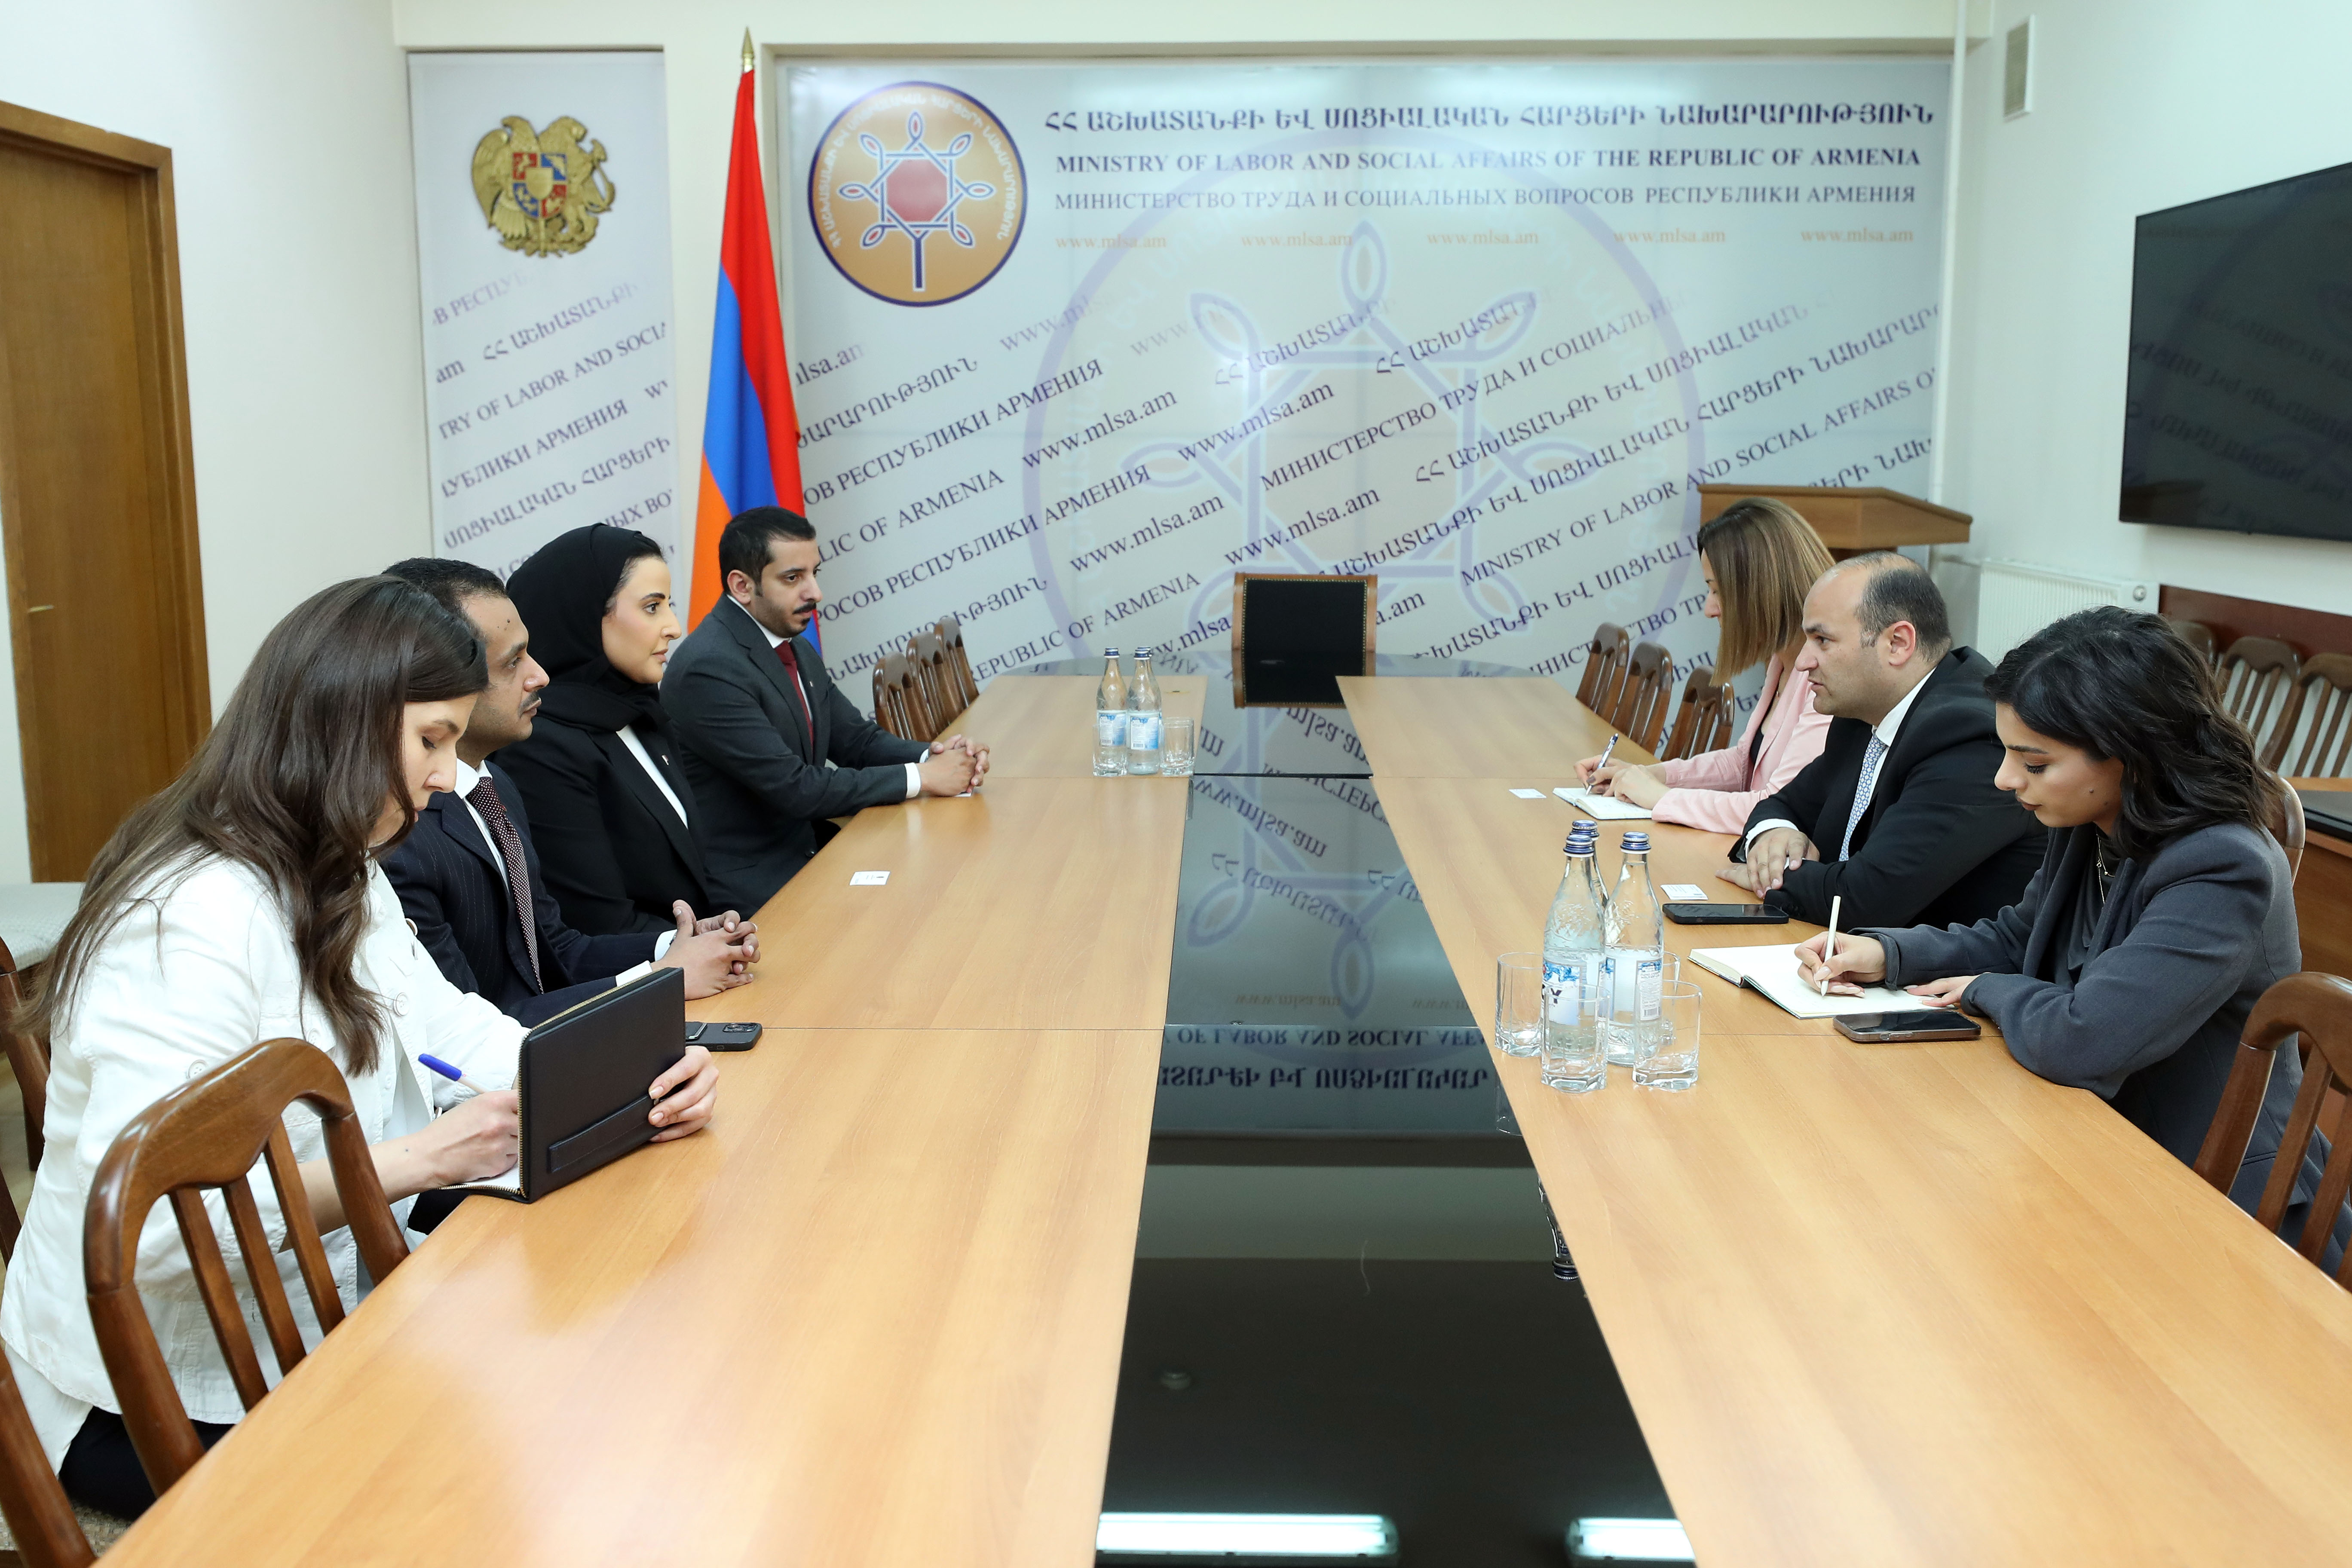 Qatar Takes Part in the International Conference in Armenia on Accelerating Disability Inclusive Social Protection